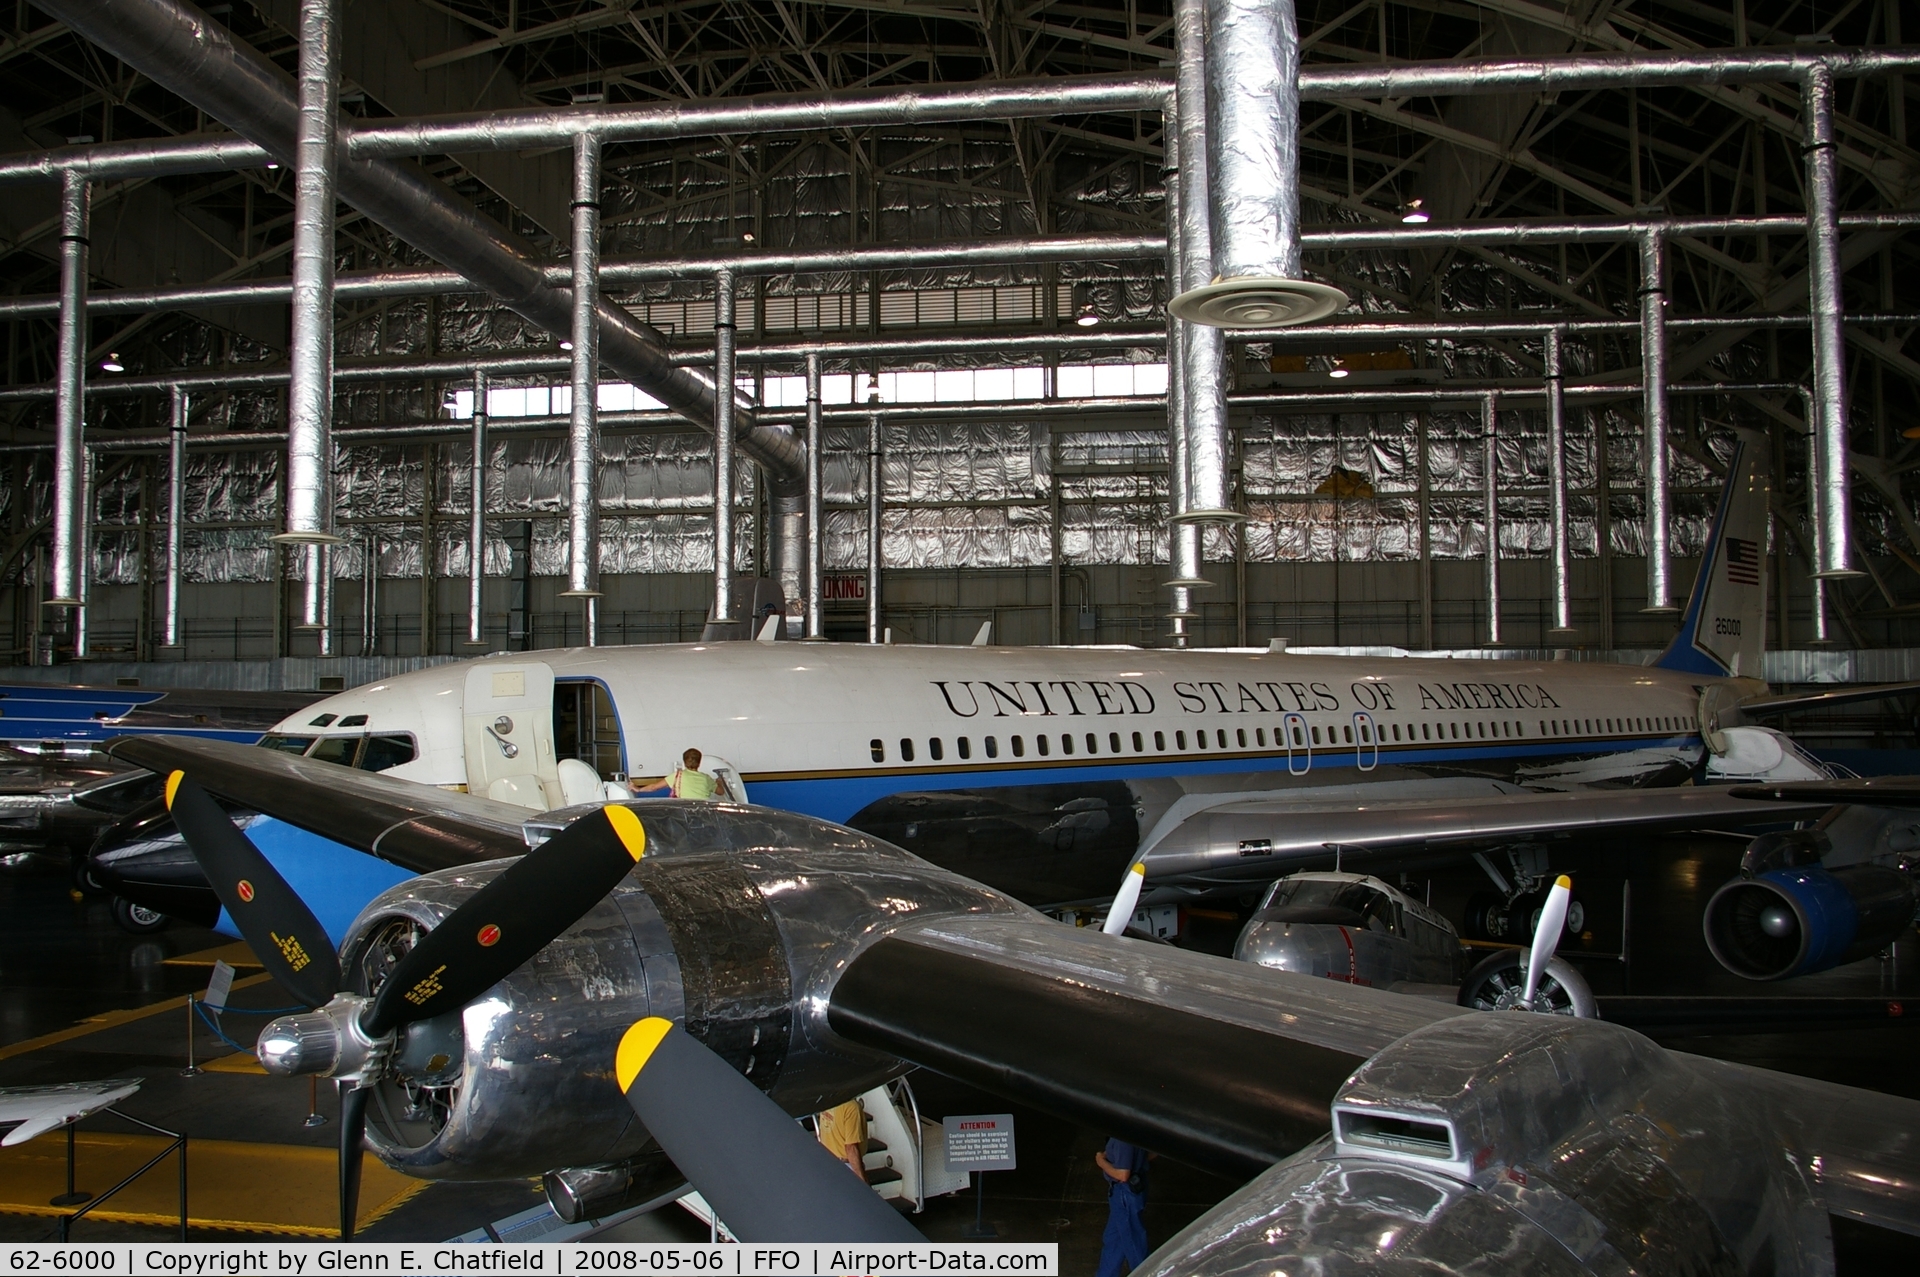 62-6000, 1962 Boeing VC-137C (707-353B) C/N 18461, Ex-Air Force One at the National Museum of the U.S. Air Force.  This one brought JFK's body home